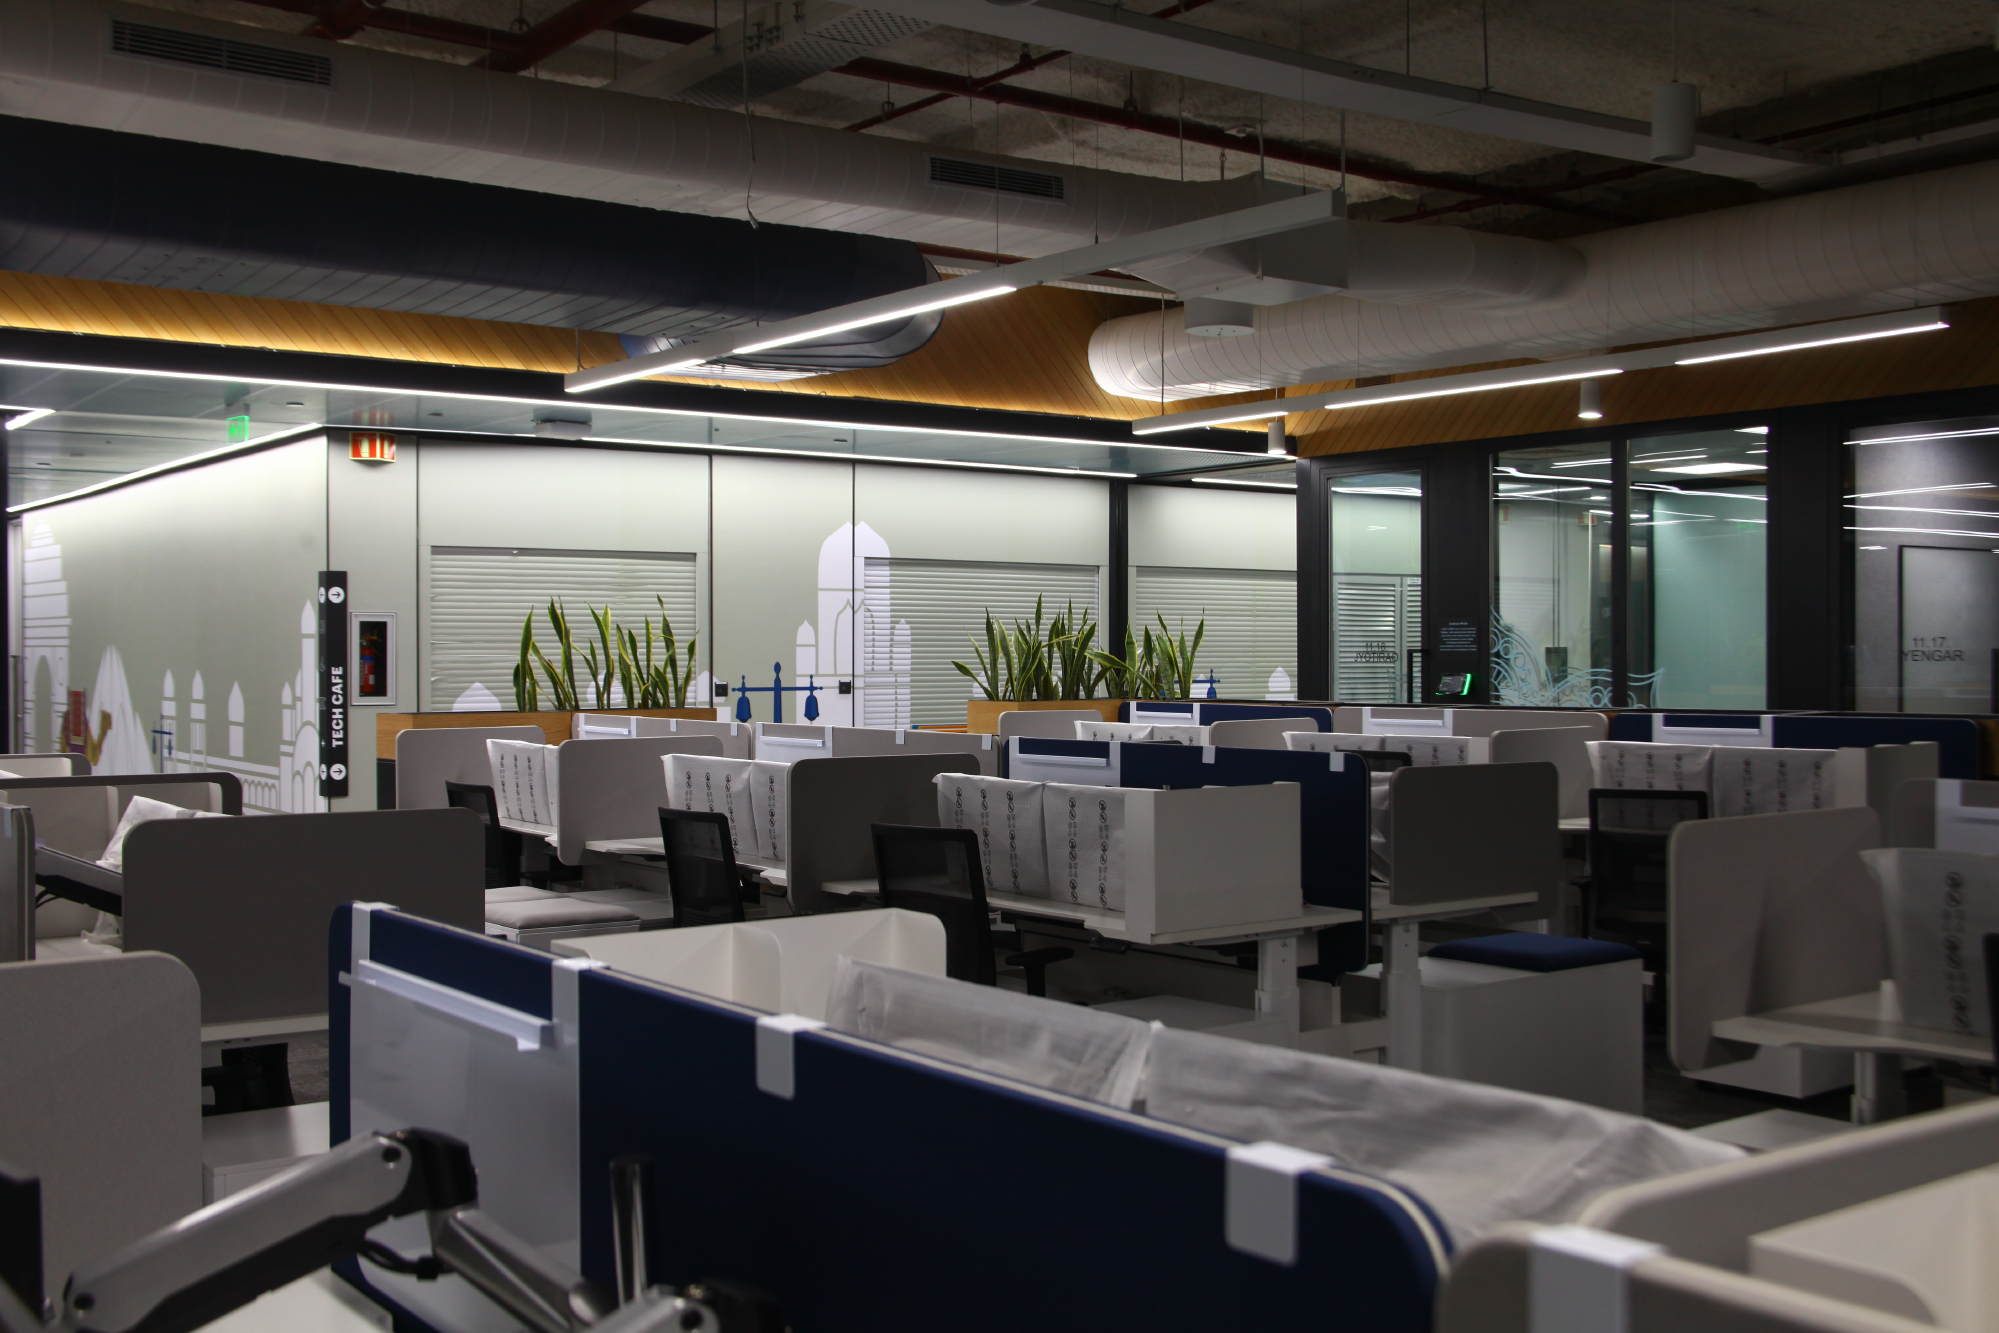 Gartner’s fully-tech-enabled workplace controls automated blinds to regulate light